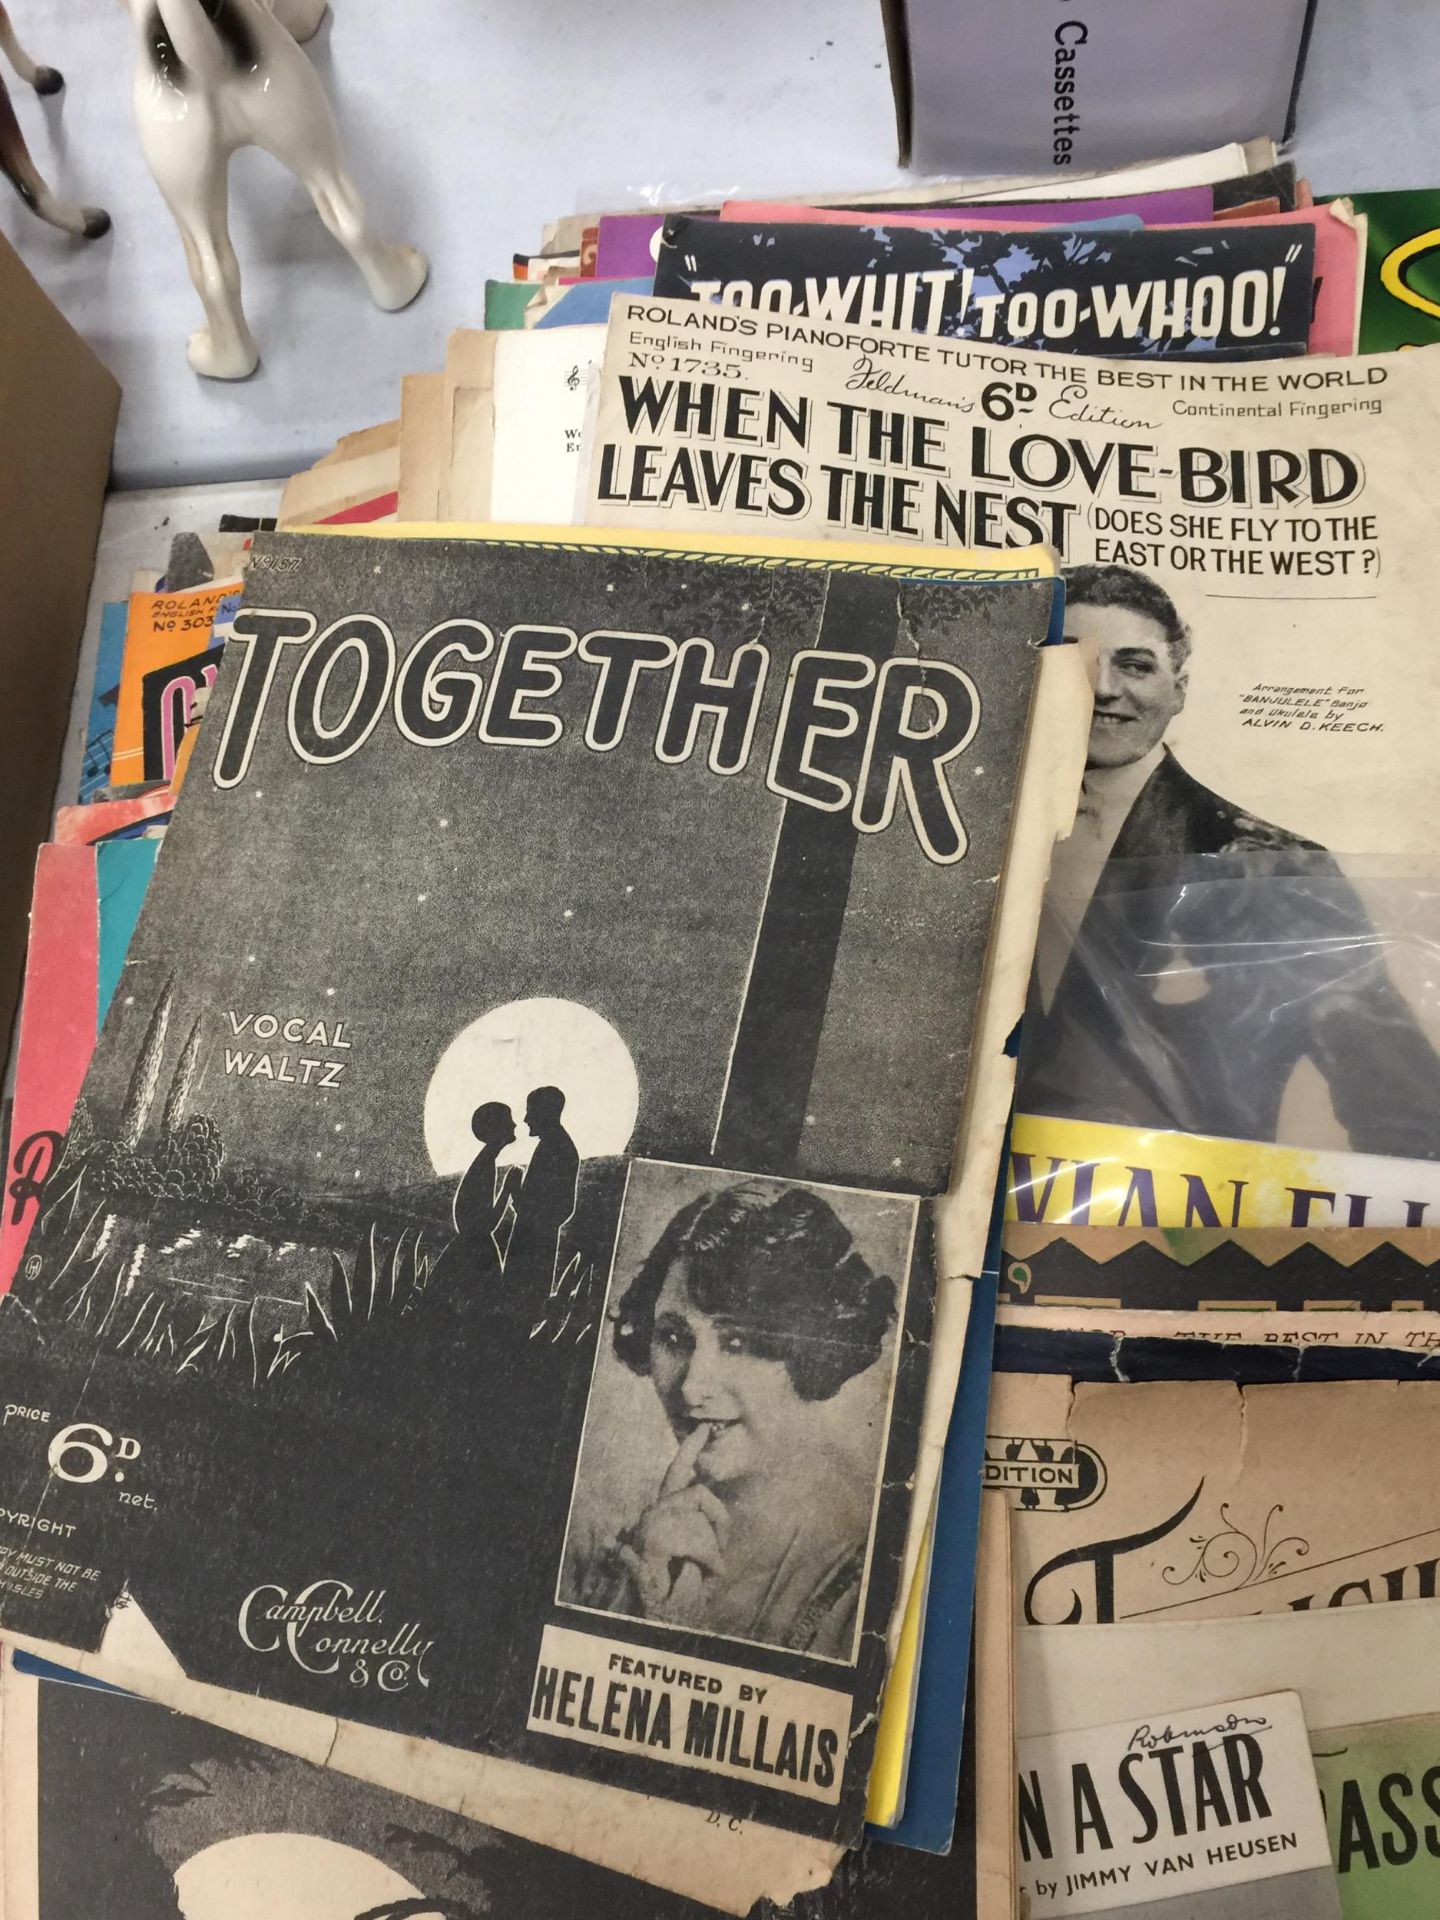 A LARGE COLLECTION OF VINTAGE SHEET MUSIC - Image 3 of 3